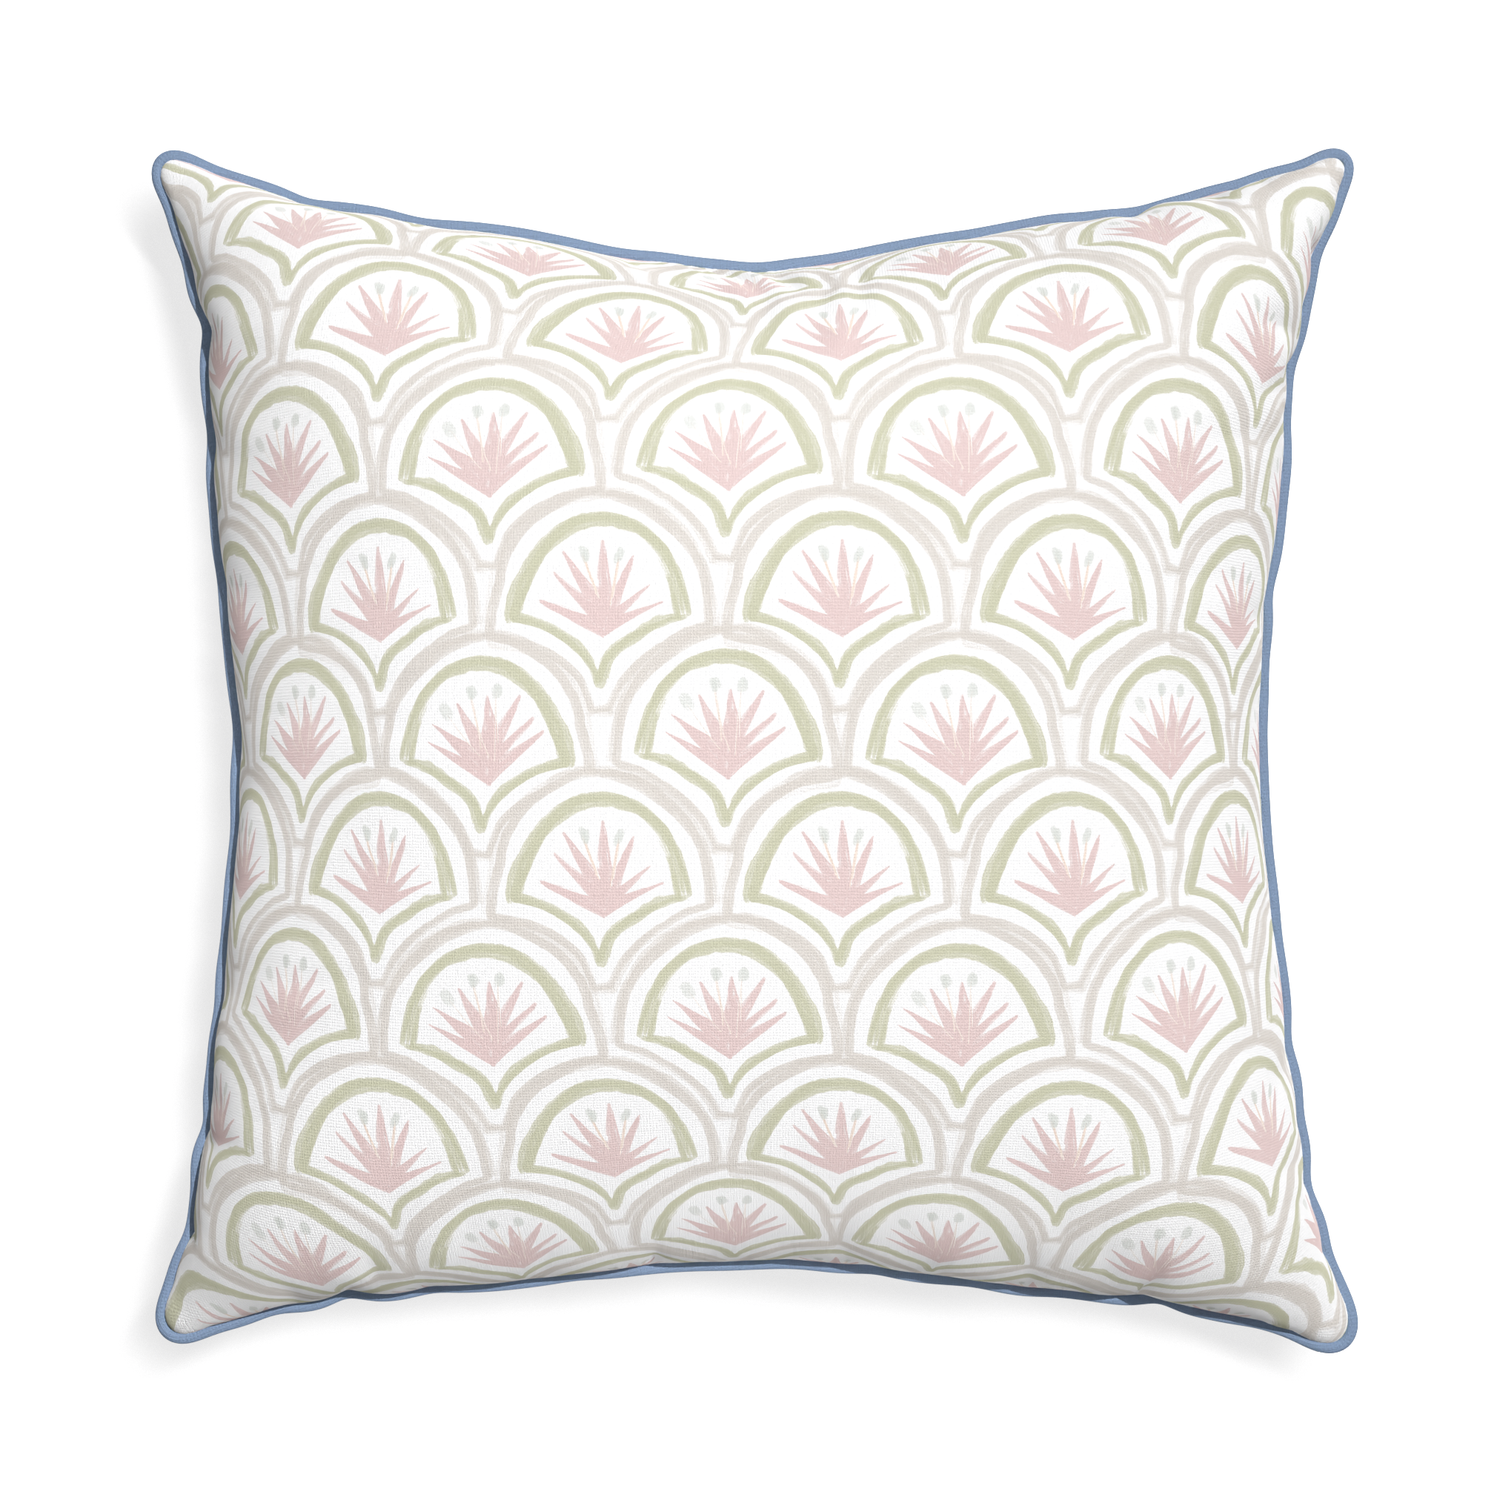 Euro-sham thatcher rose custom pillow with sky piping on white background